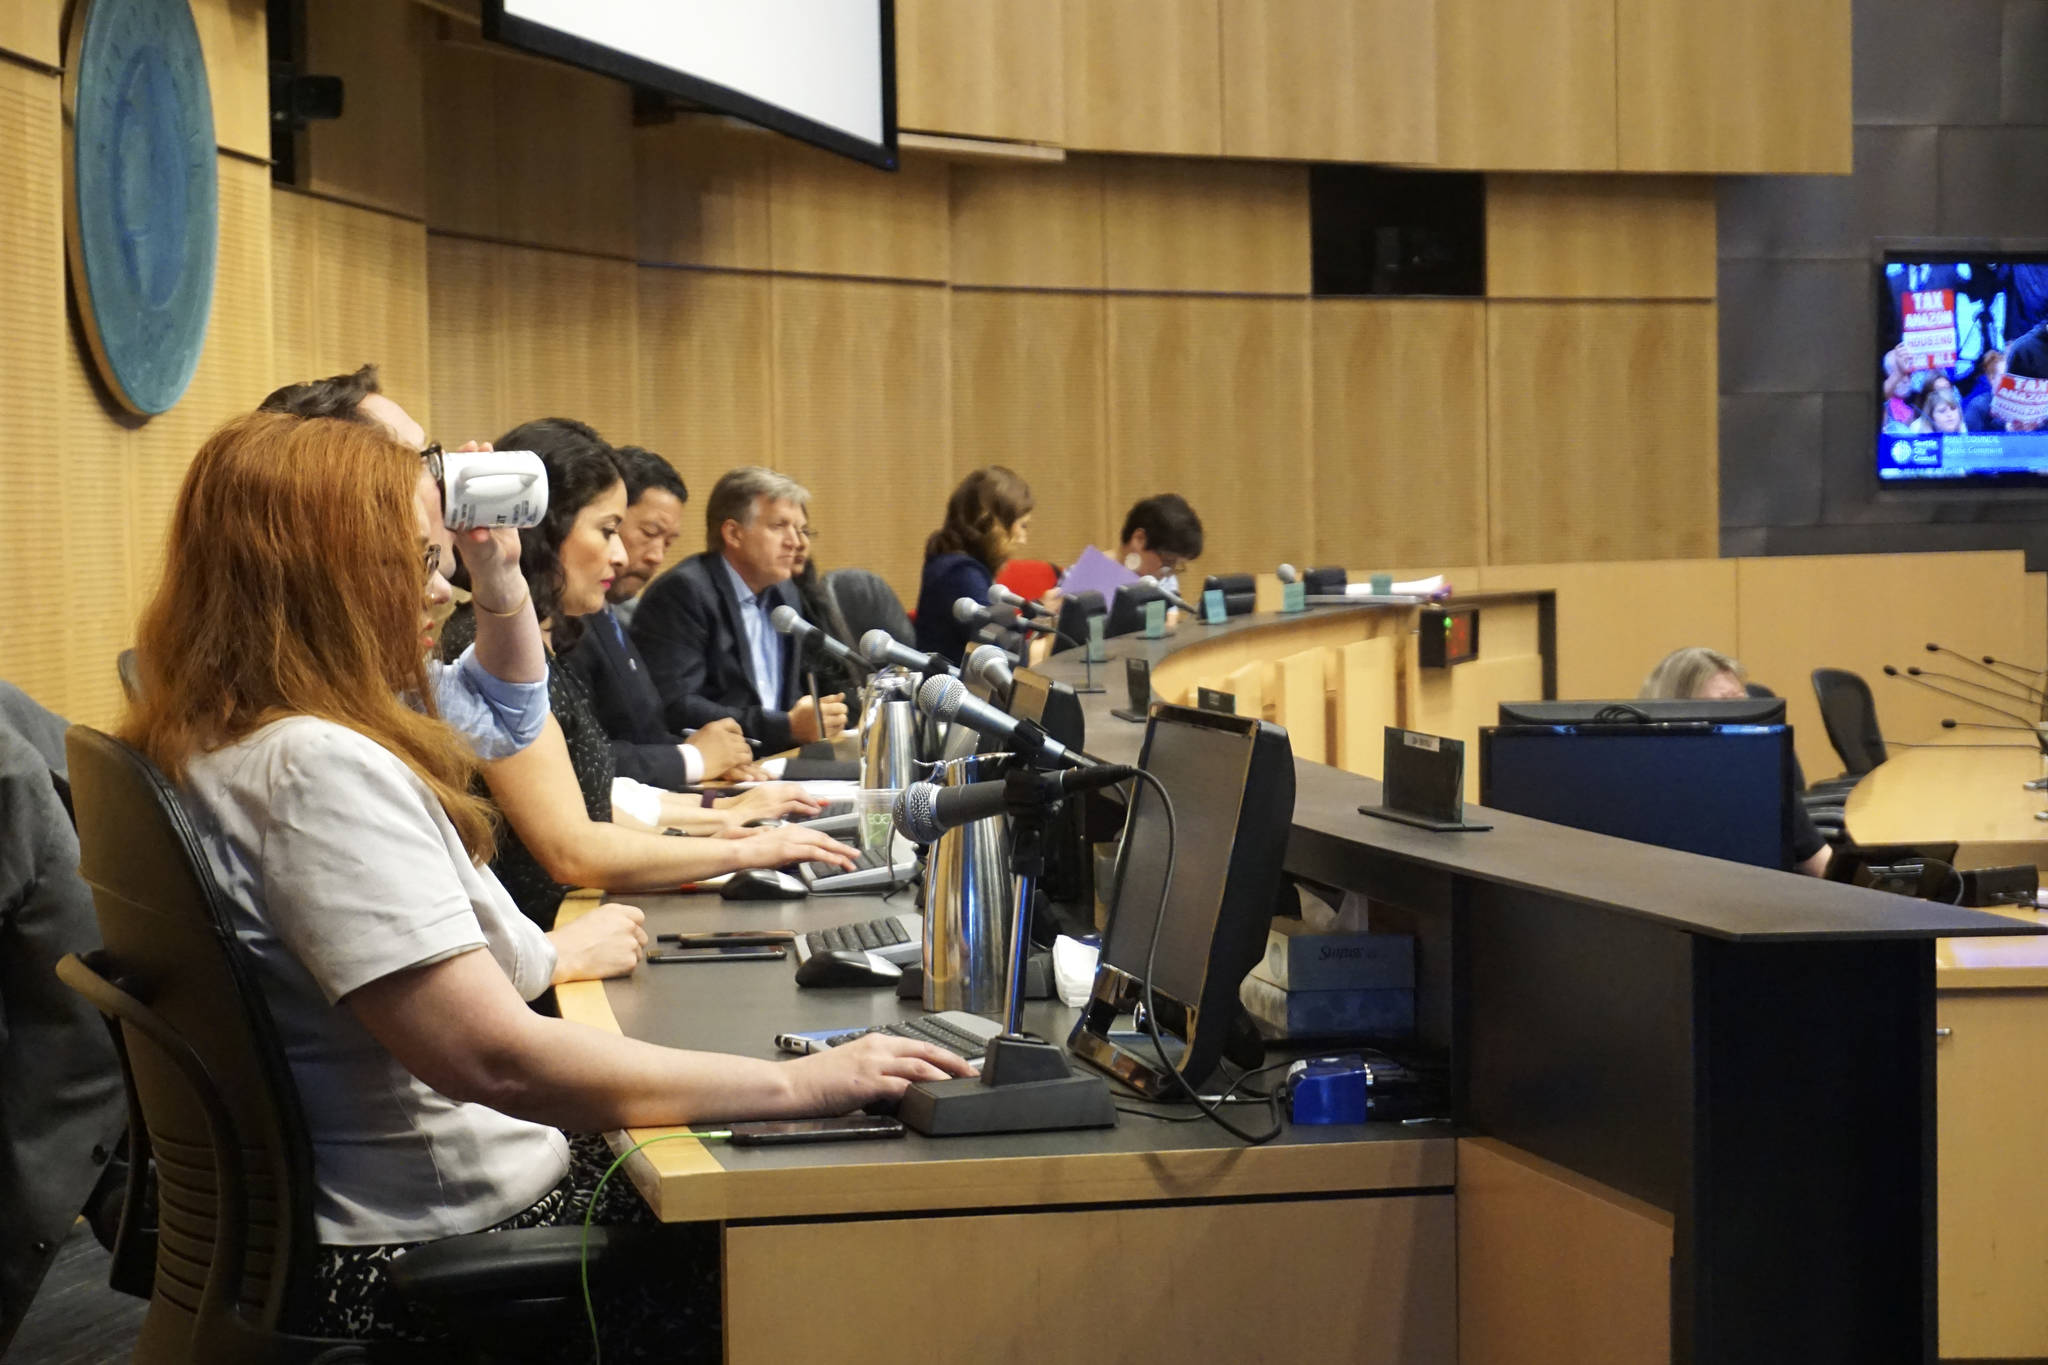 The Seattle City Council voted 7-2 in favor of the motion to repeal the head tax. Photo by Melissa Hellmann